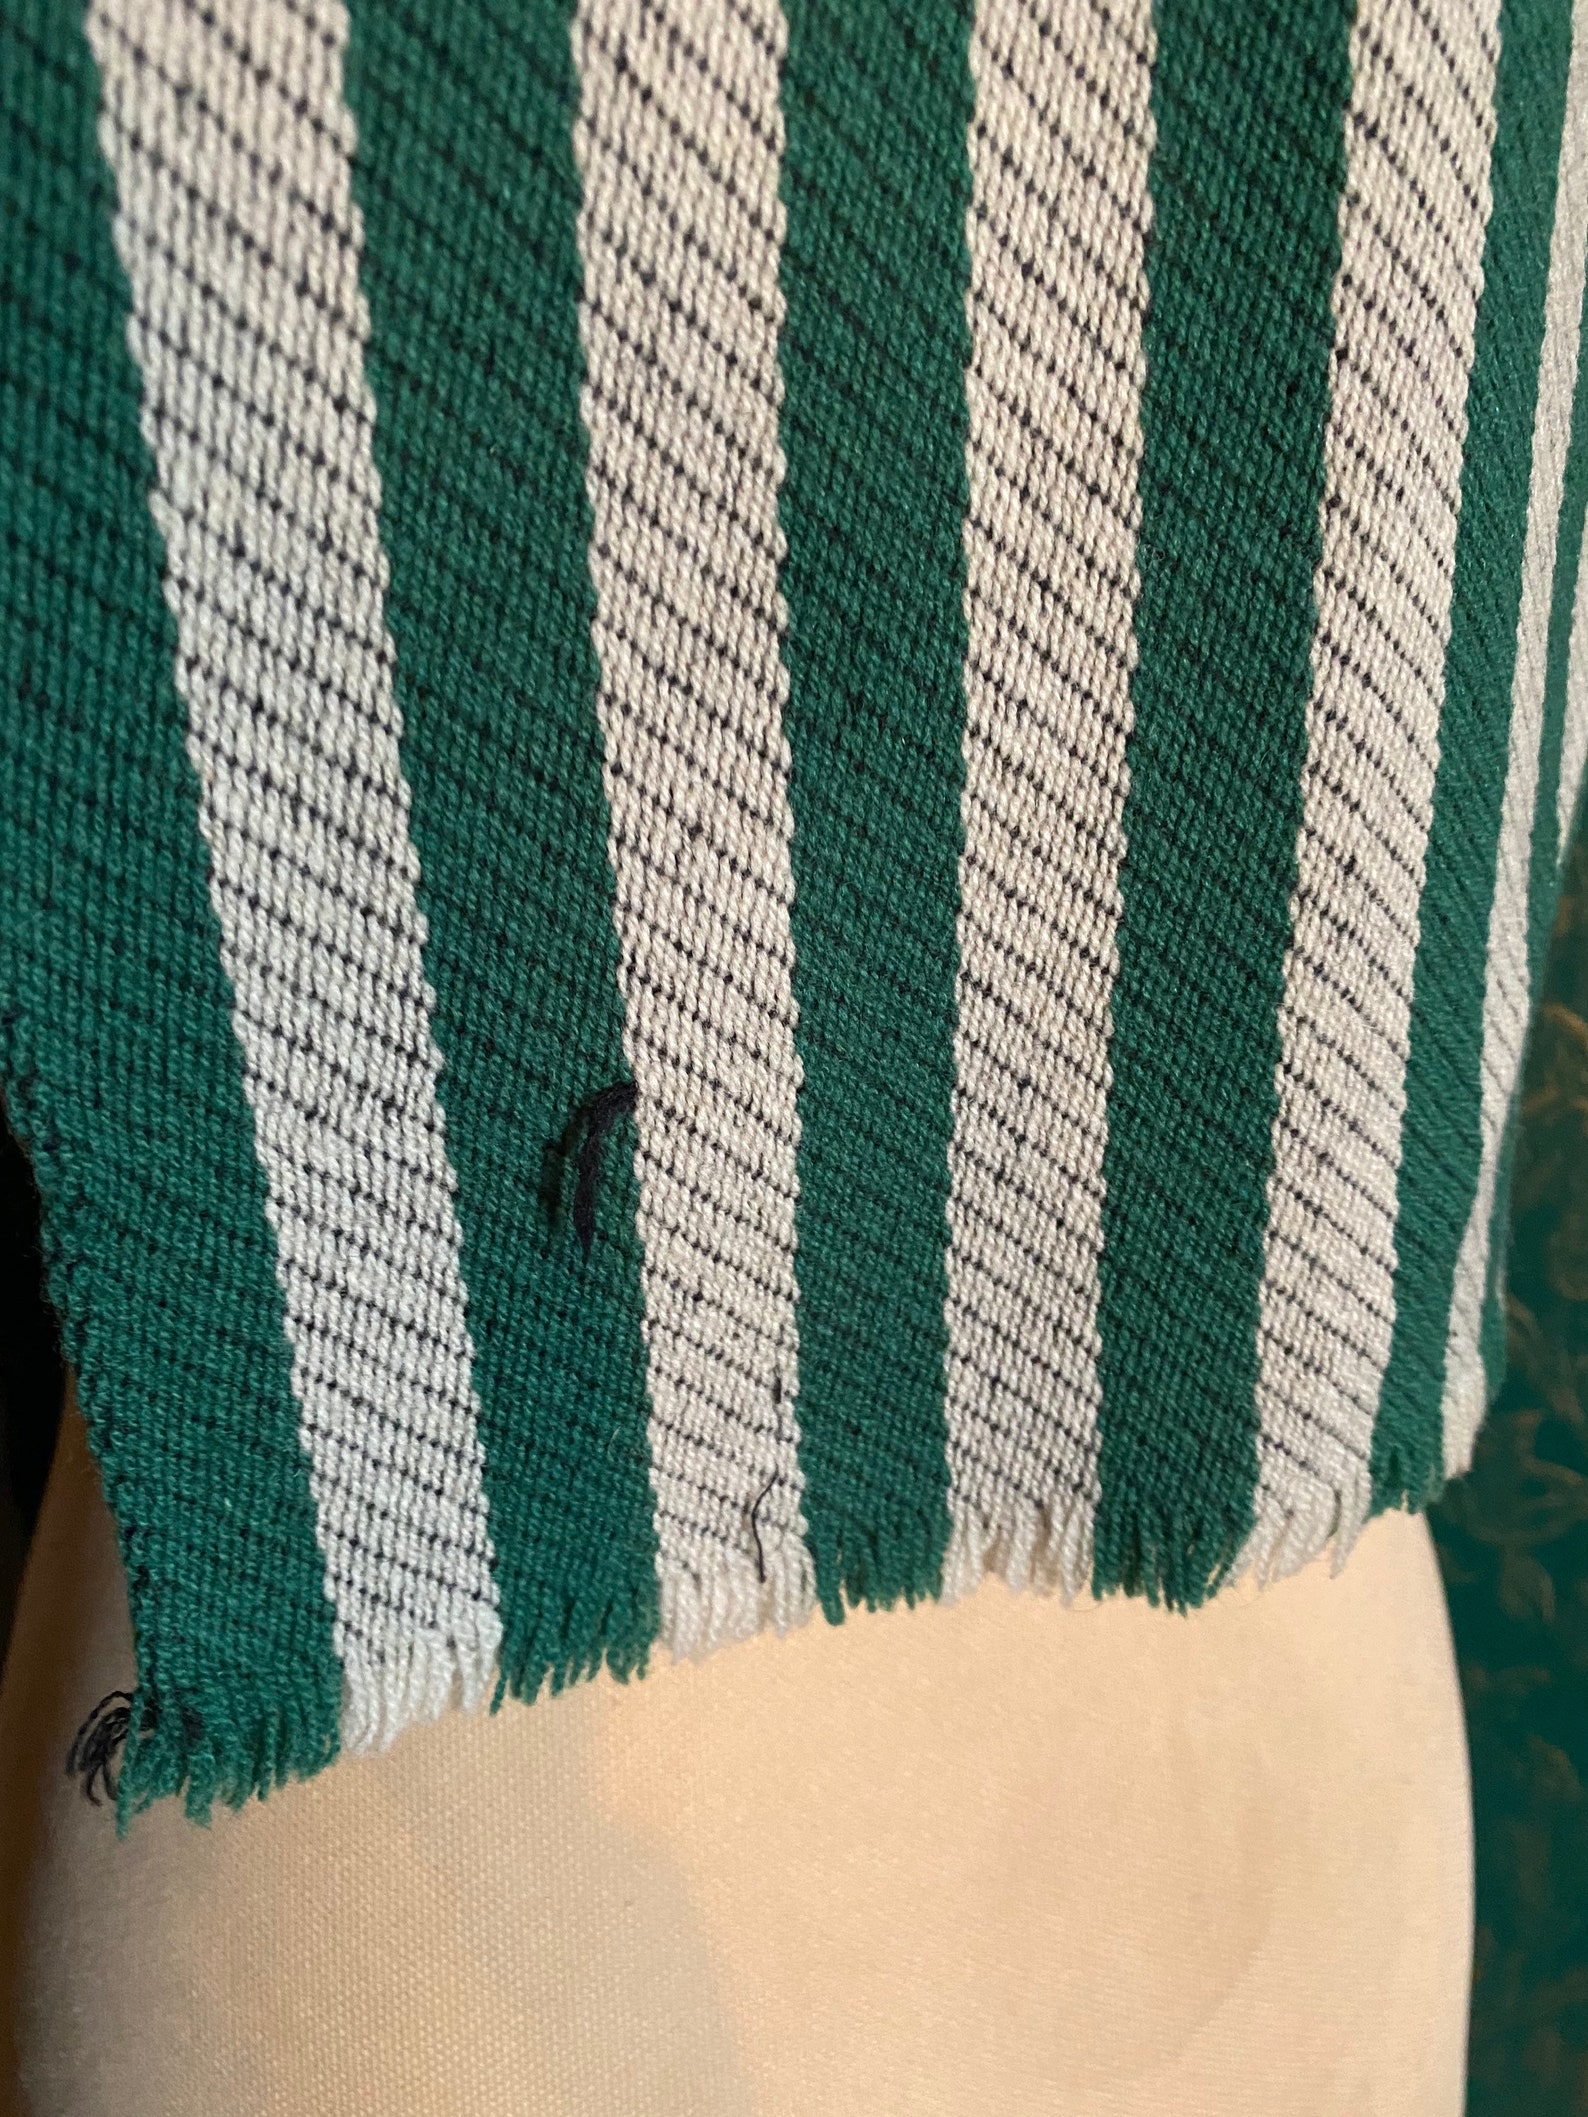 Vintage Green and White Stripe Wool Scarf | Etsy